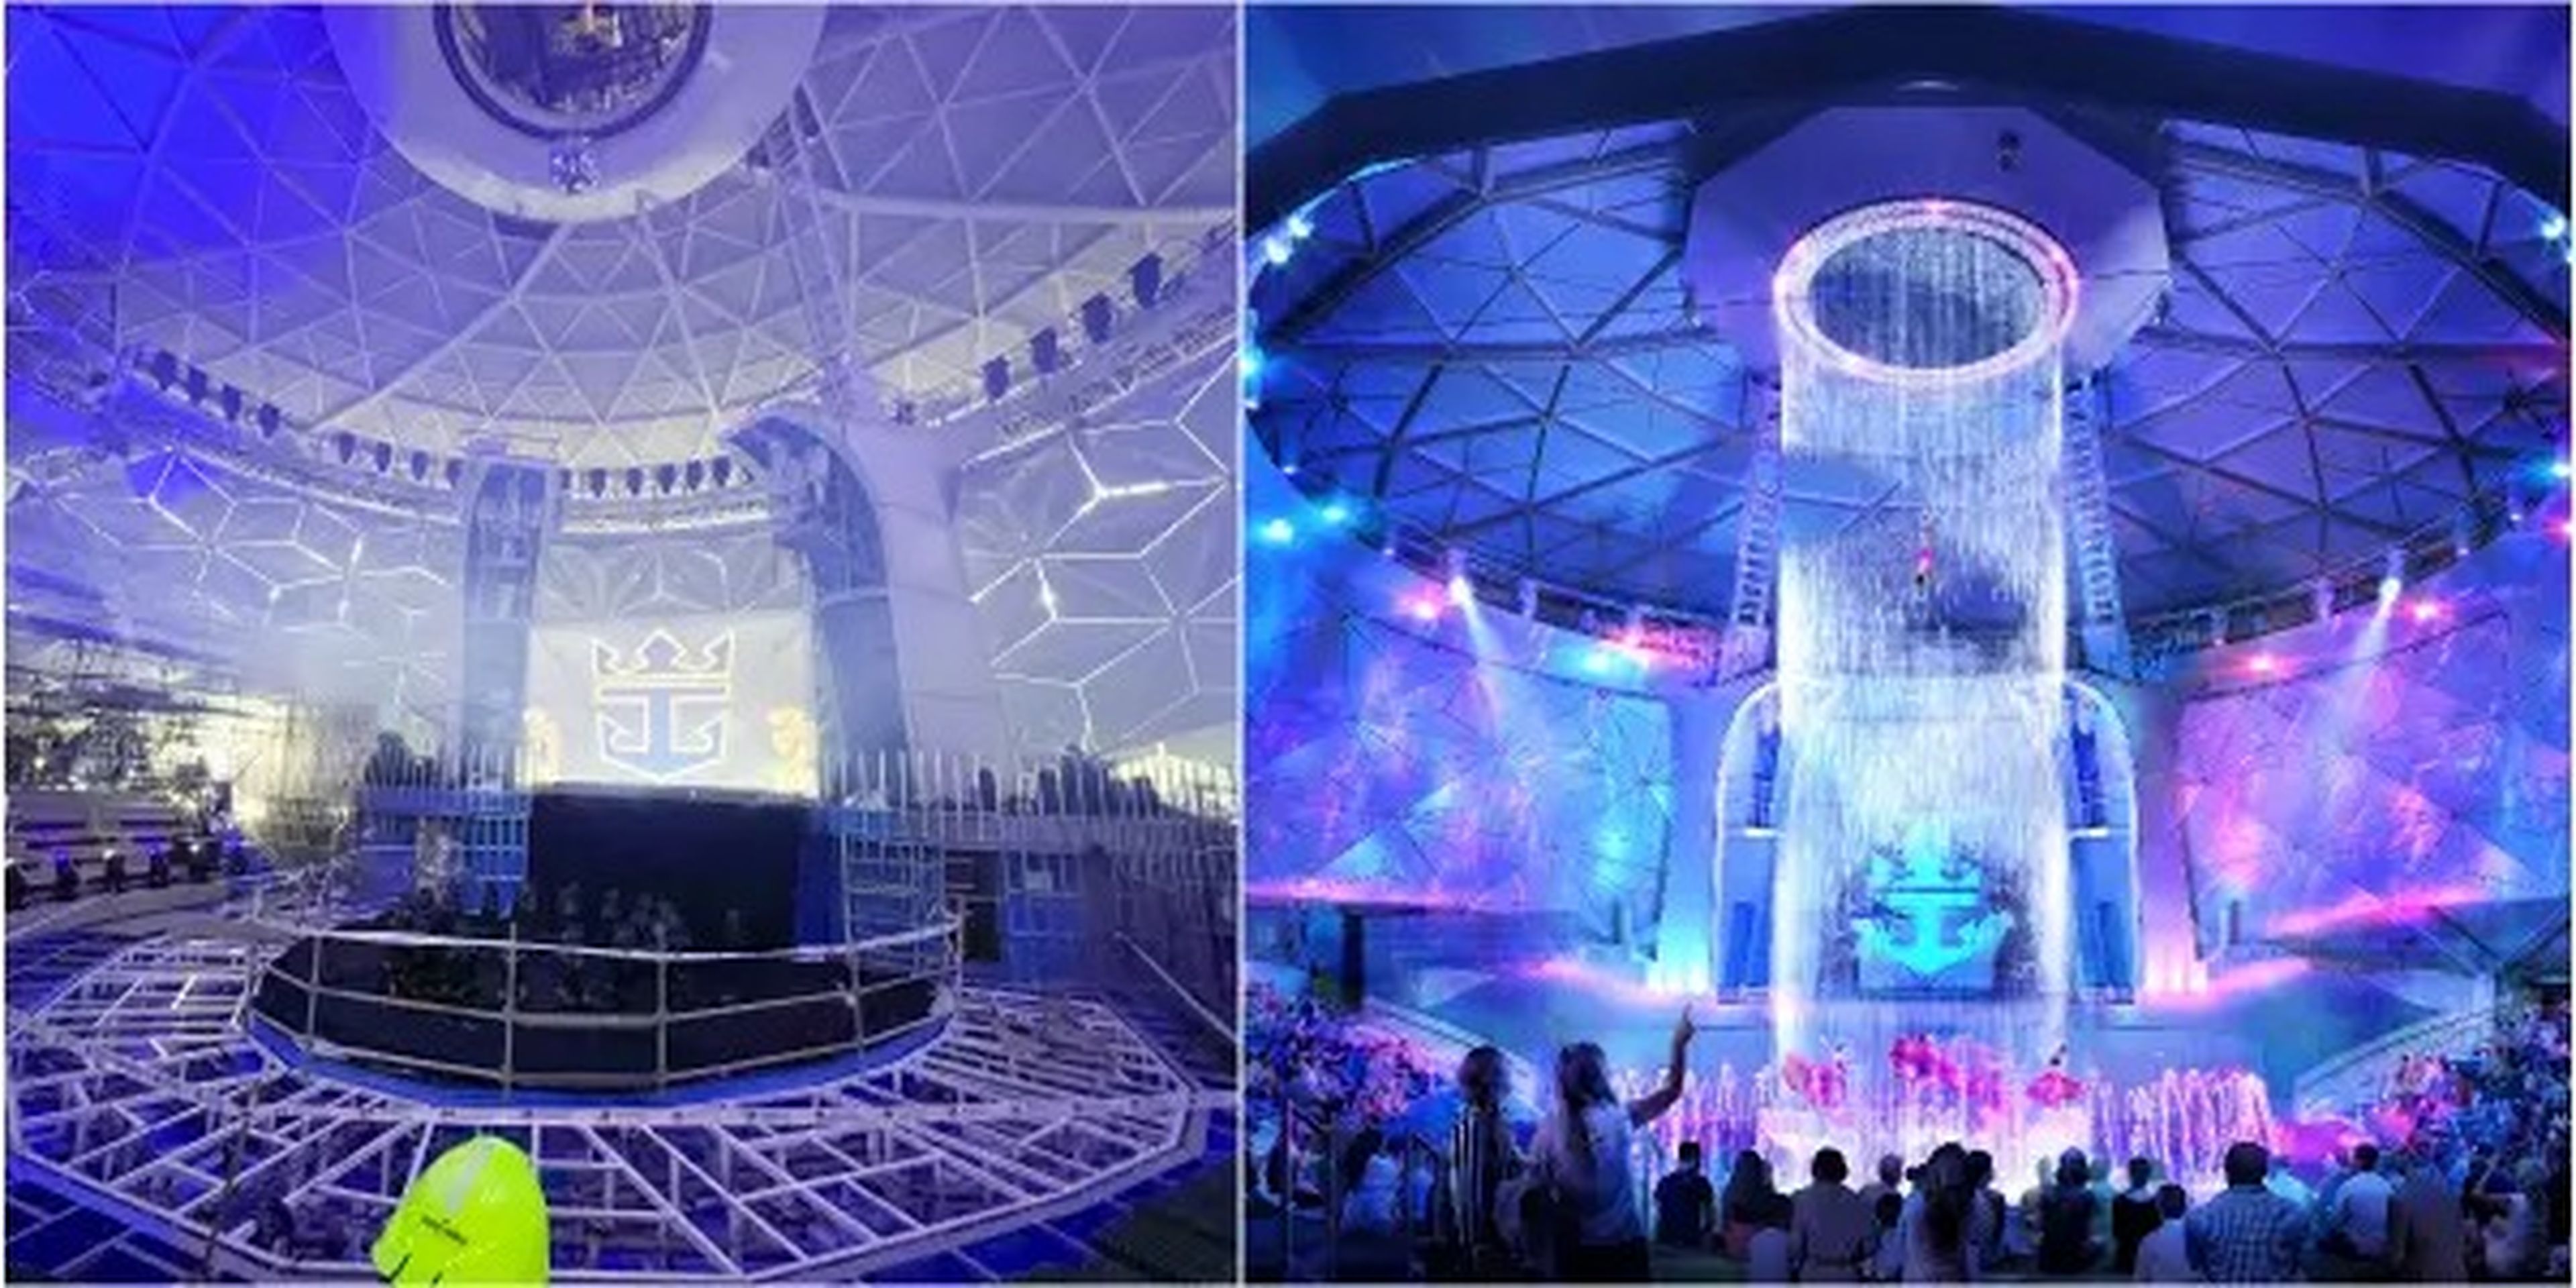 A collage of the Royal Caribbean Icon of the Seas  AquaTheater under construction compared to renderings of the venue